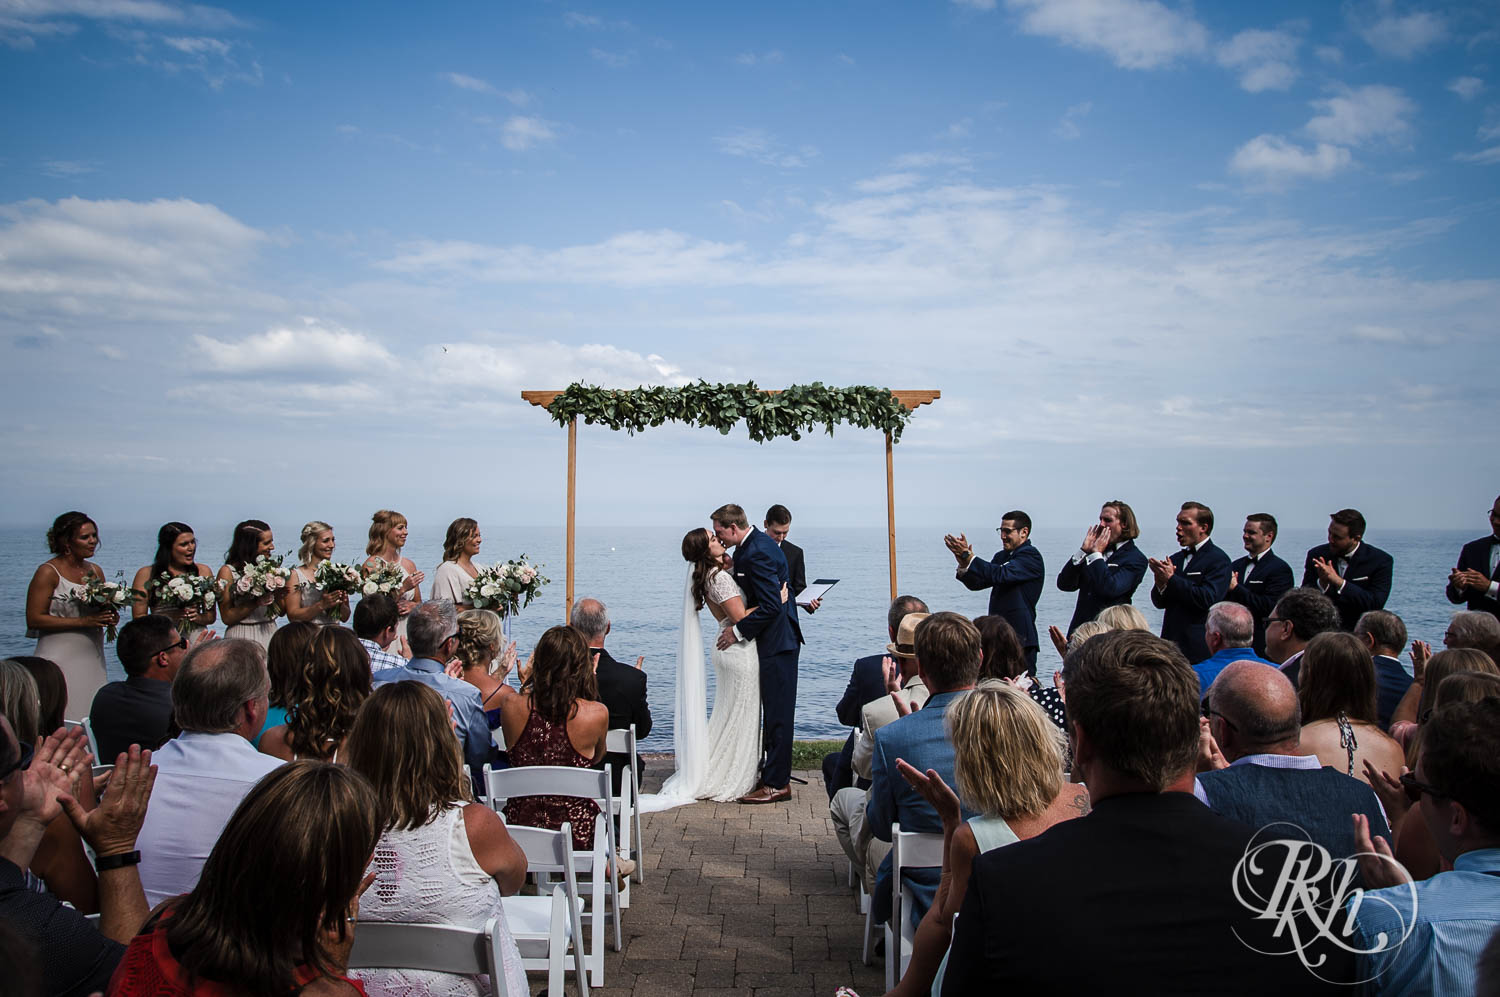 Bride and groom kiss during ceremony at their Bluefin Bay wedding in Tofte, Minnesota.